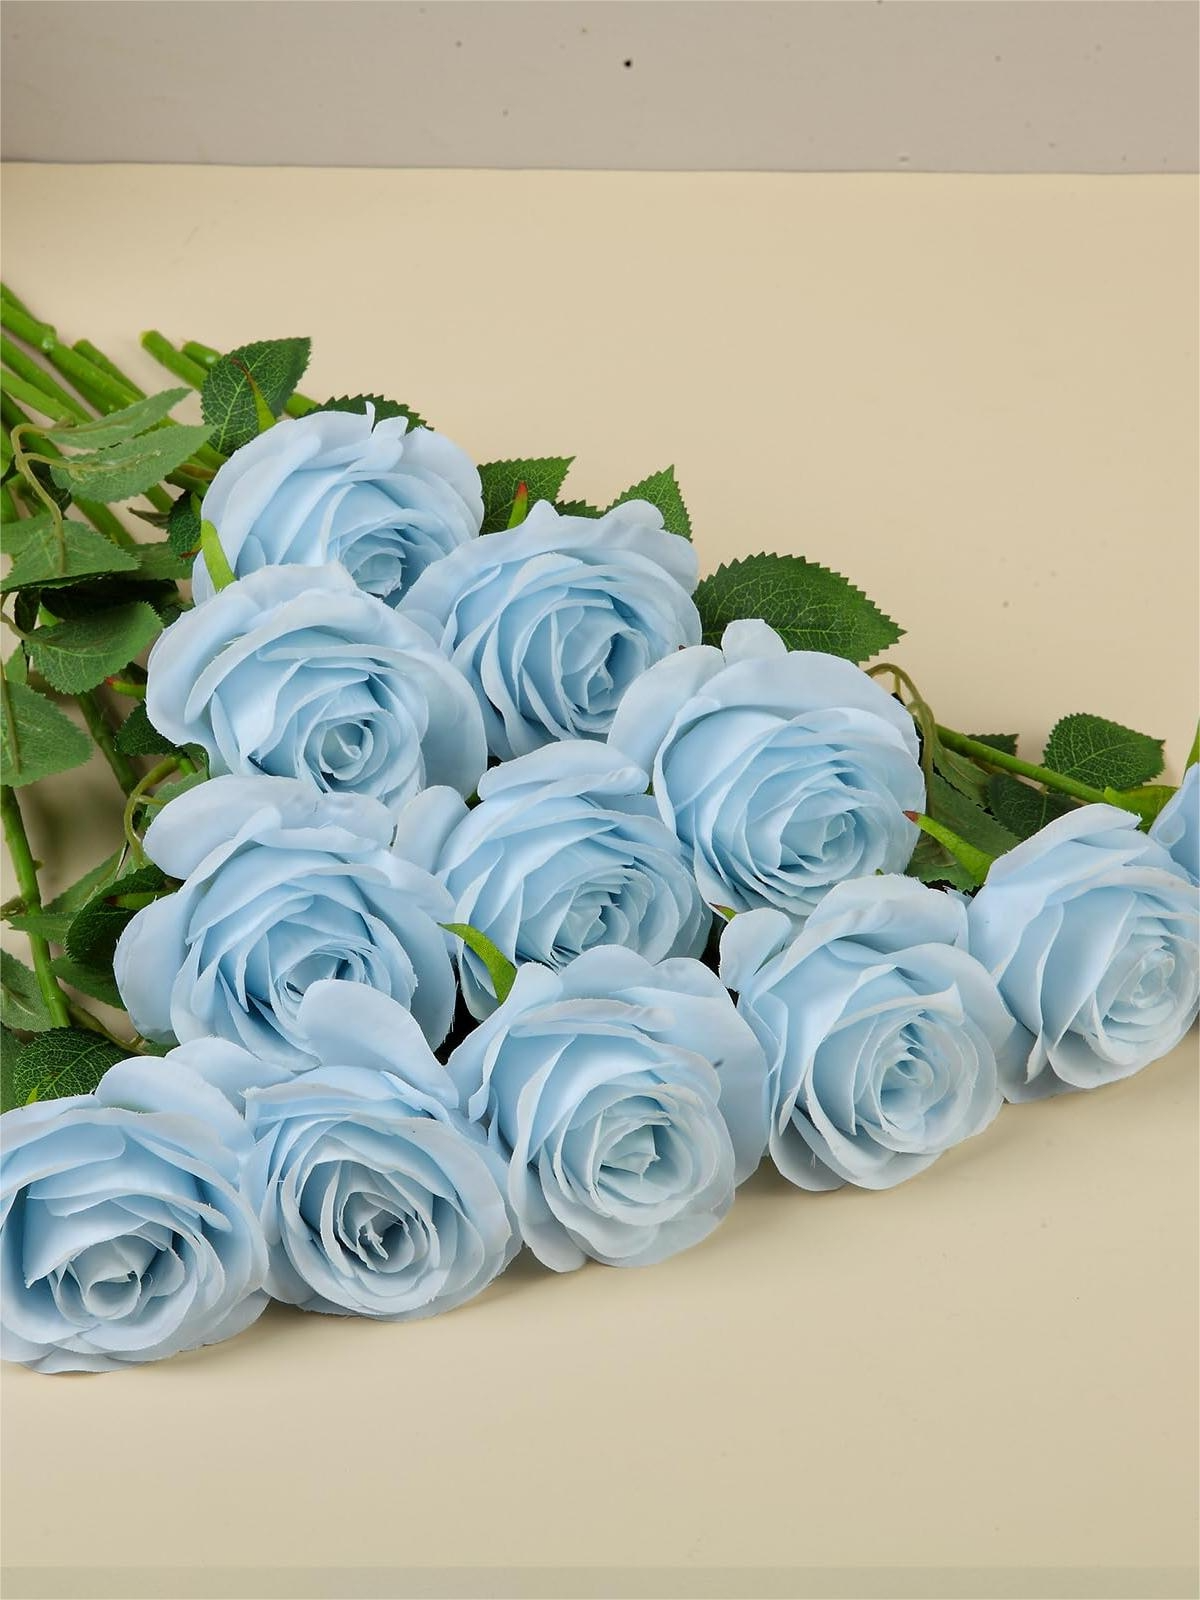 Gray Blue Artificial Rose Flowers With Long Stems Wedding Bouquet Centerpieces Decorations HH8025